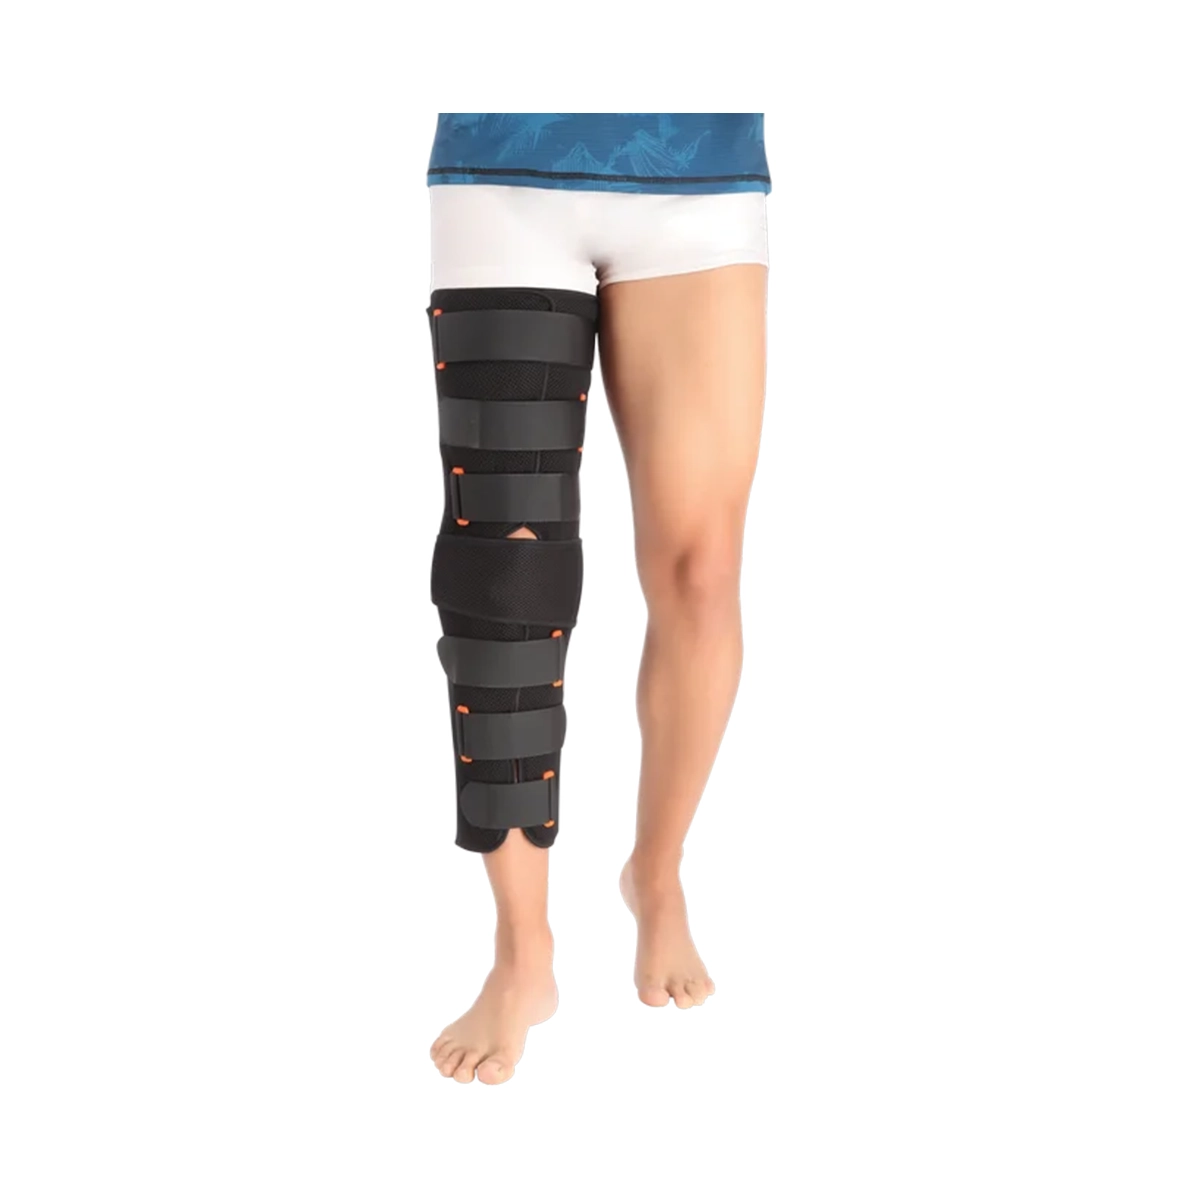 First product image of Flamingo Knee Immobilizer 21" OC 2035 S